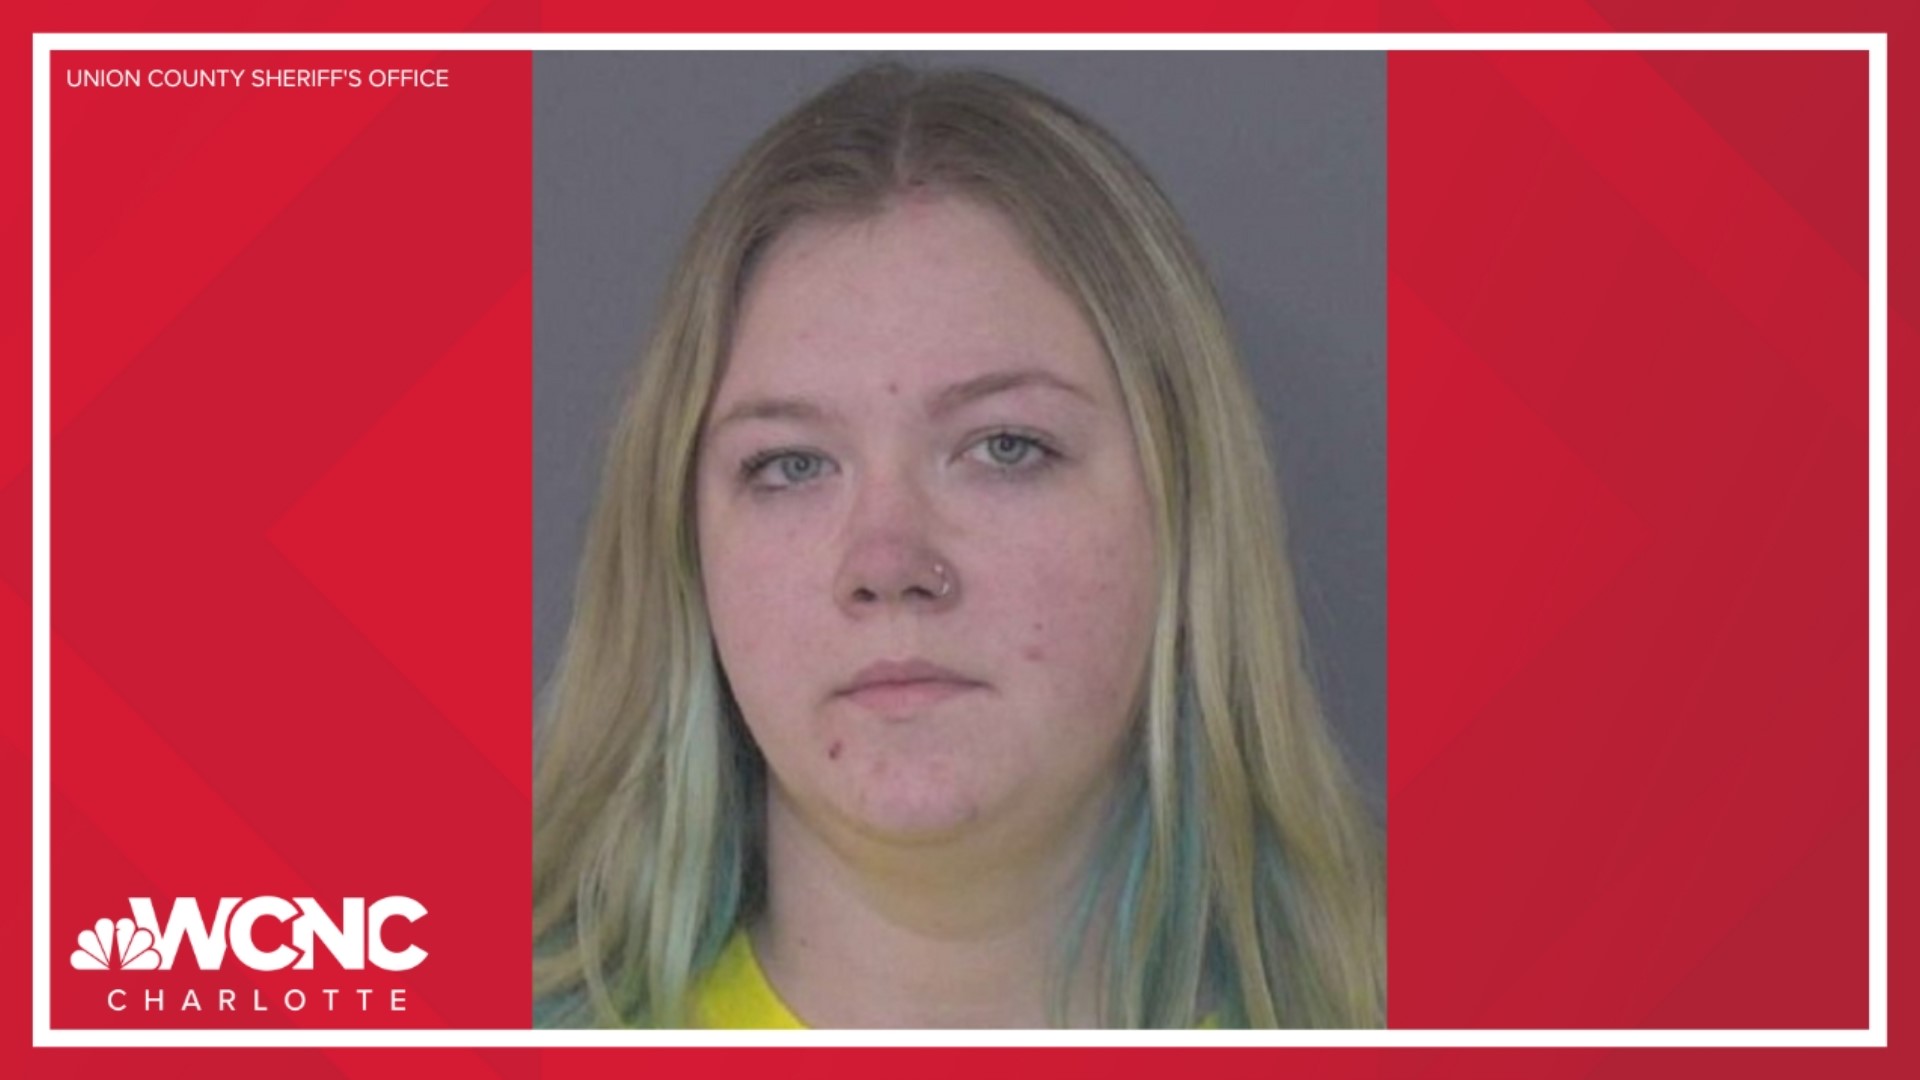 The Union County Sheriff's Office says an instructional assistant at a Monroe school has been charged after she allegedly took an inappropriate photo of a student.